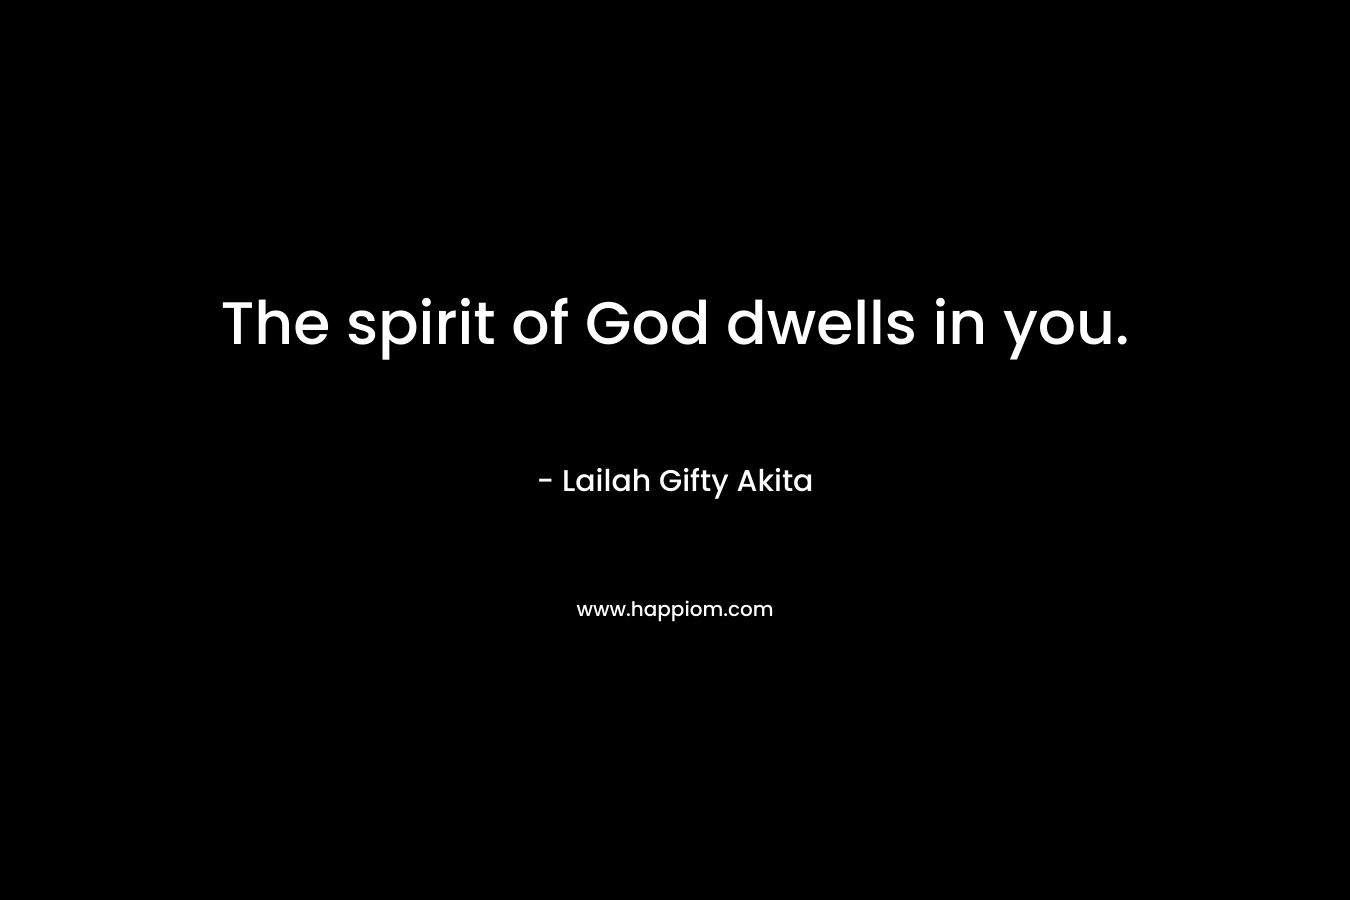 The spirit of God dwells in you.